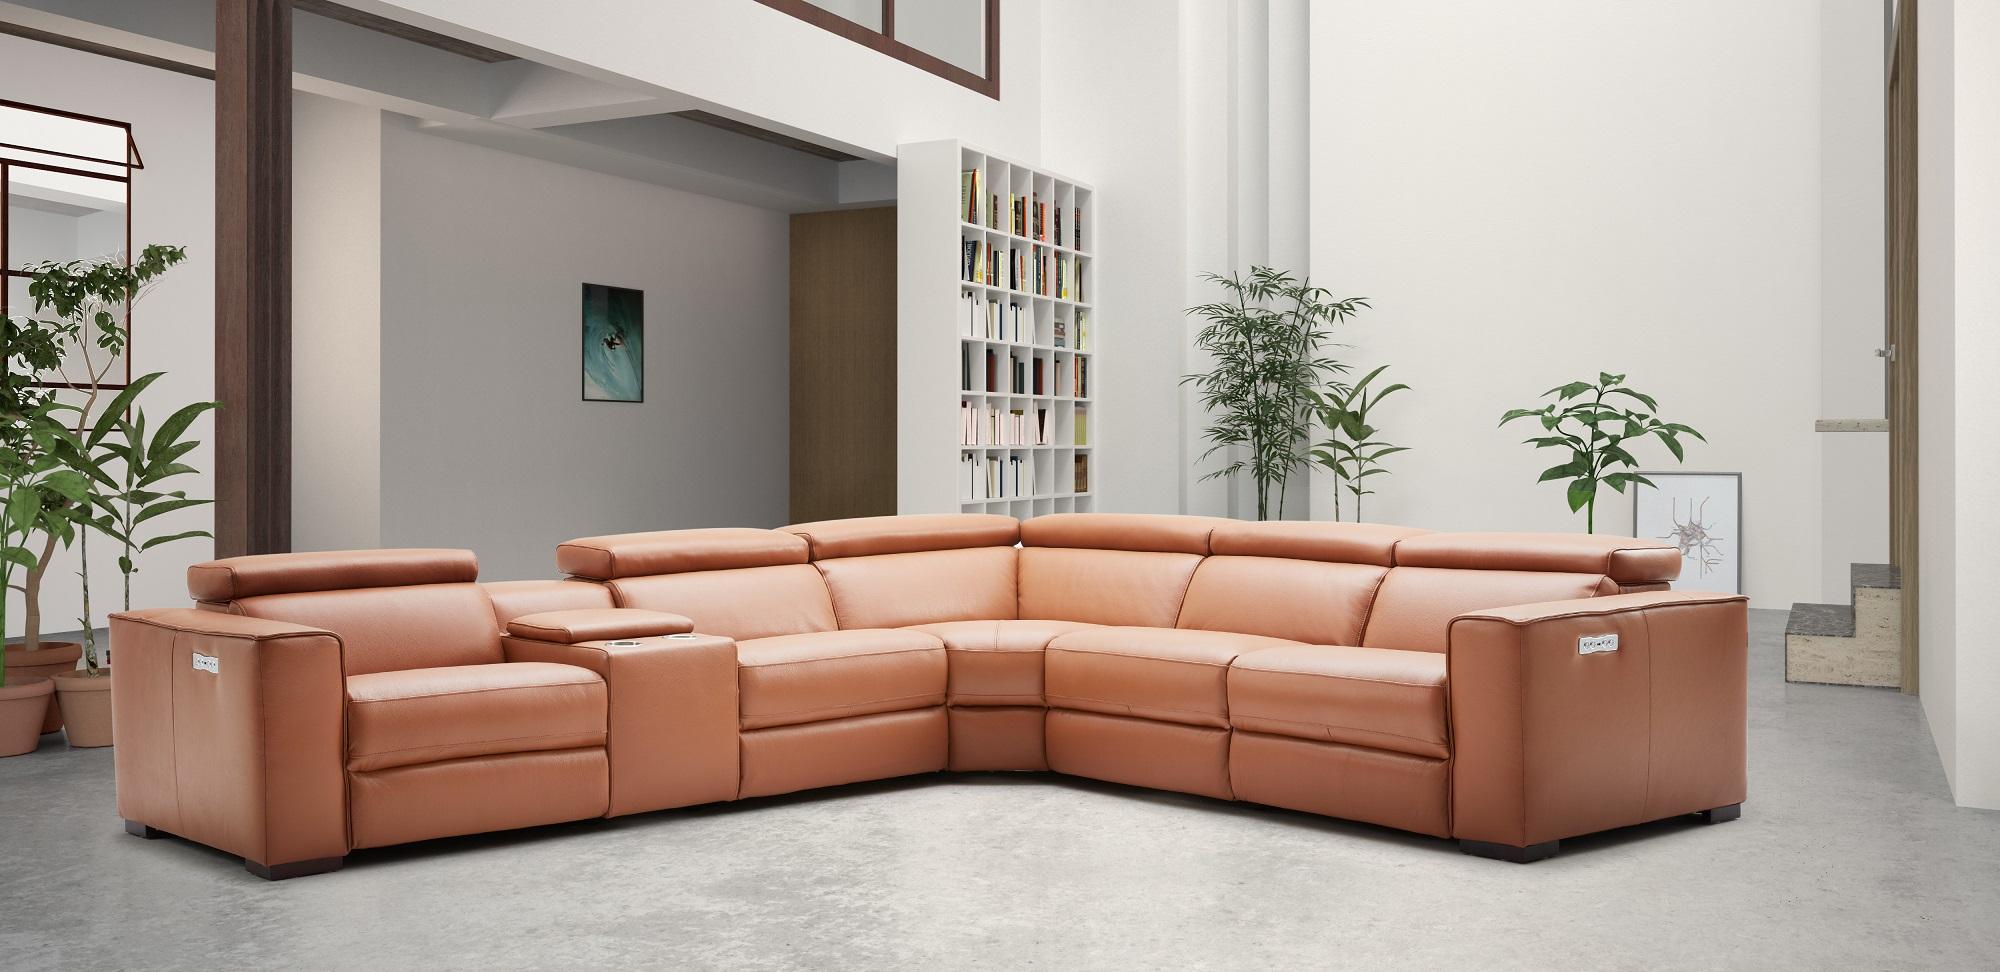 Contemporary Reclining Sectional Picasso SKU18865-C in Caramel Top grain leather